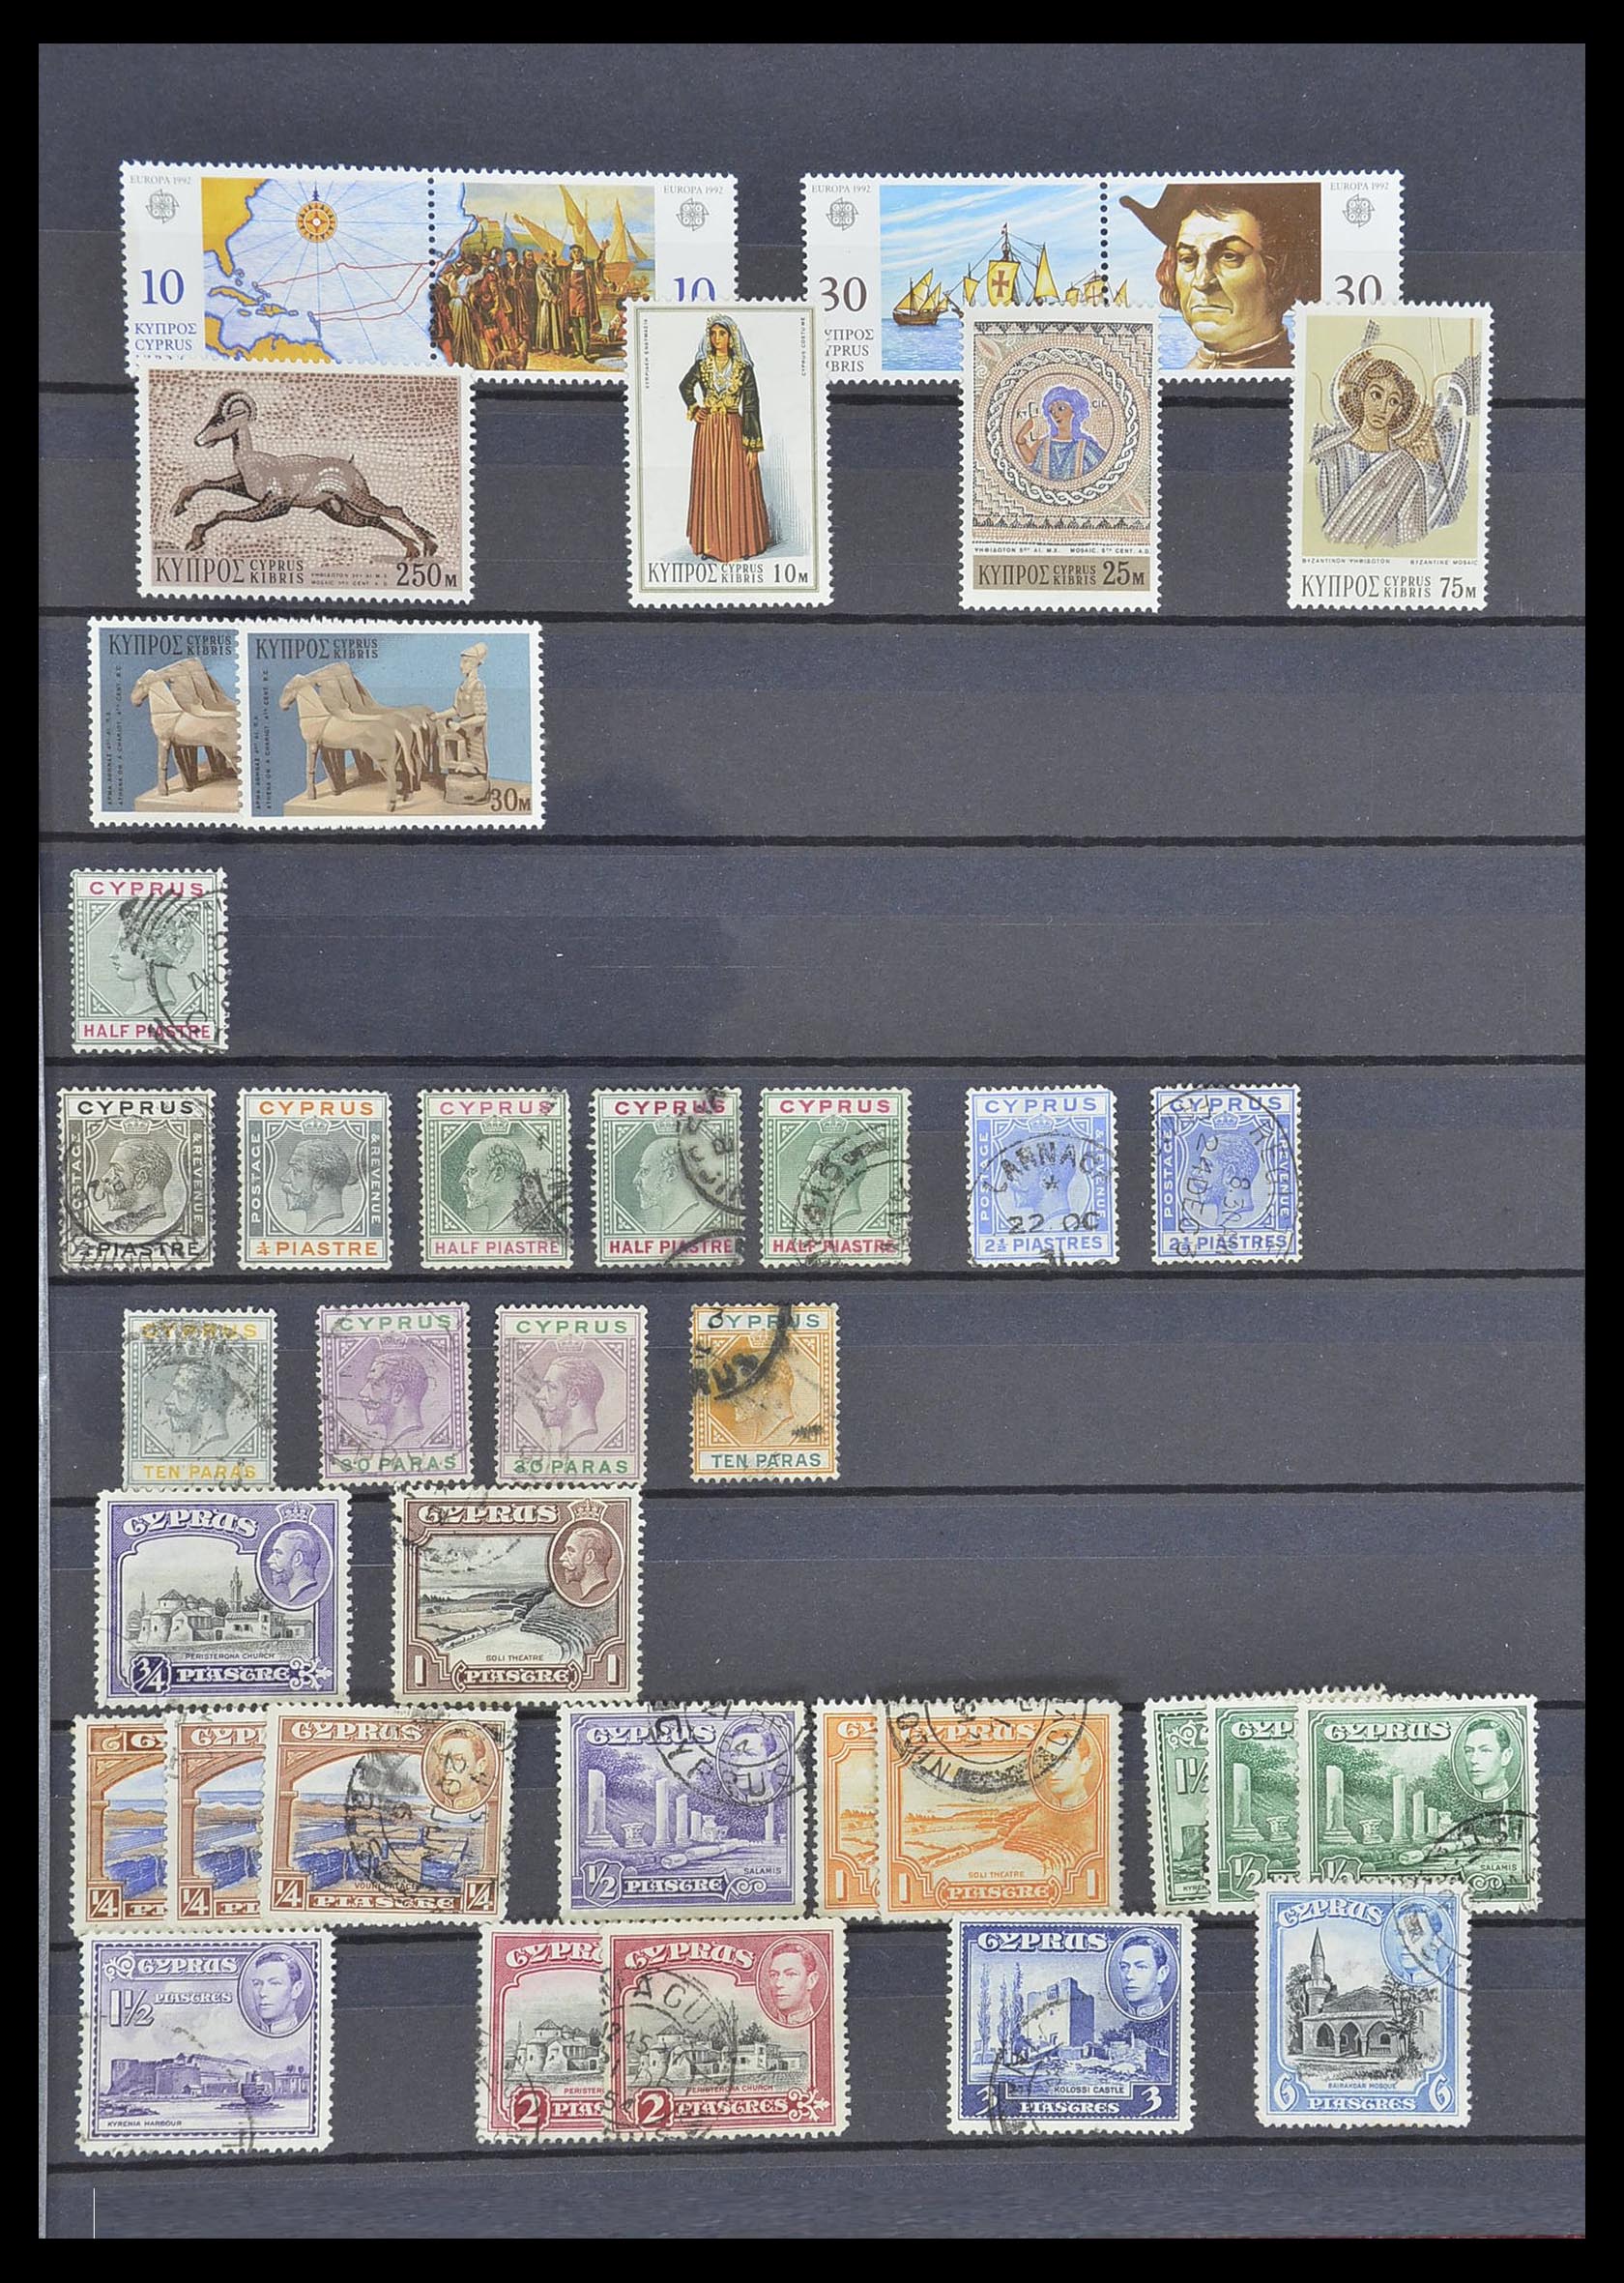 33217 025 - Stamp collection 33217 Cyprus 1955-1988 and Turkish Cyprus 1974-1985.